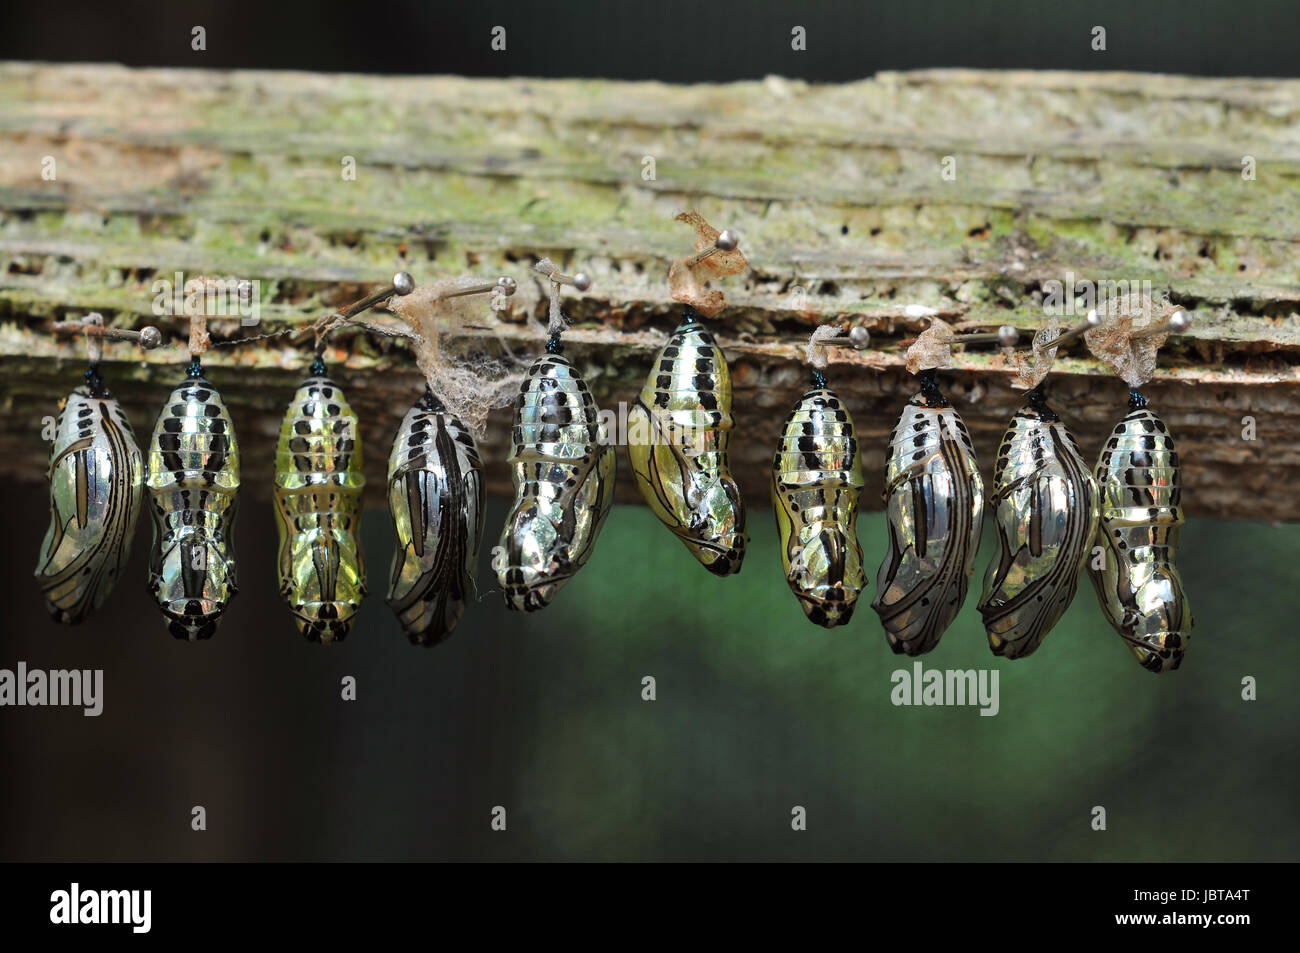 Rows of butterfly cocoons and newly hatched butterfly. Stock Photo